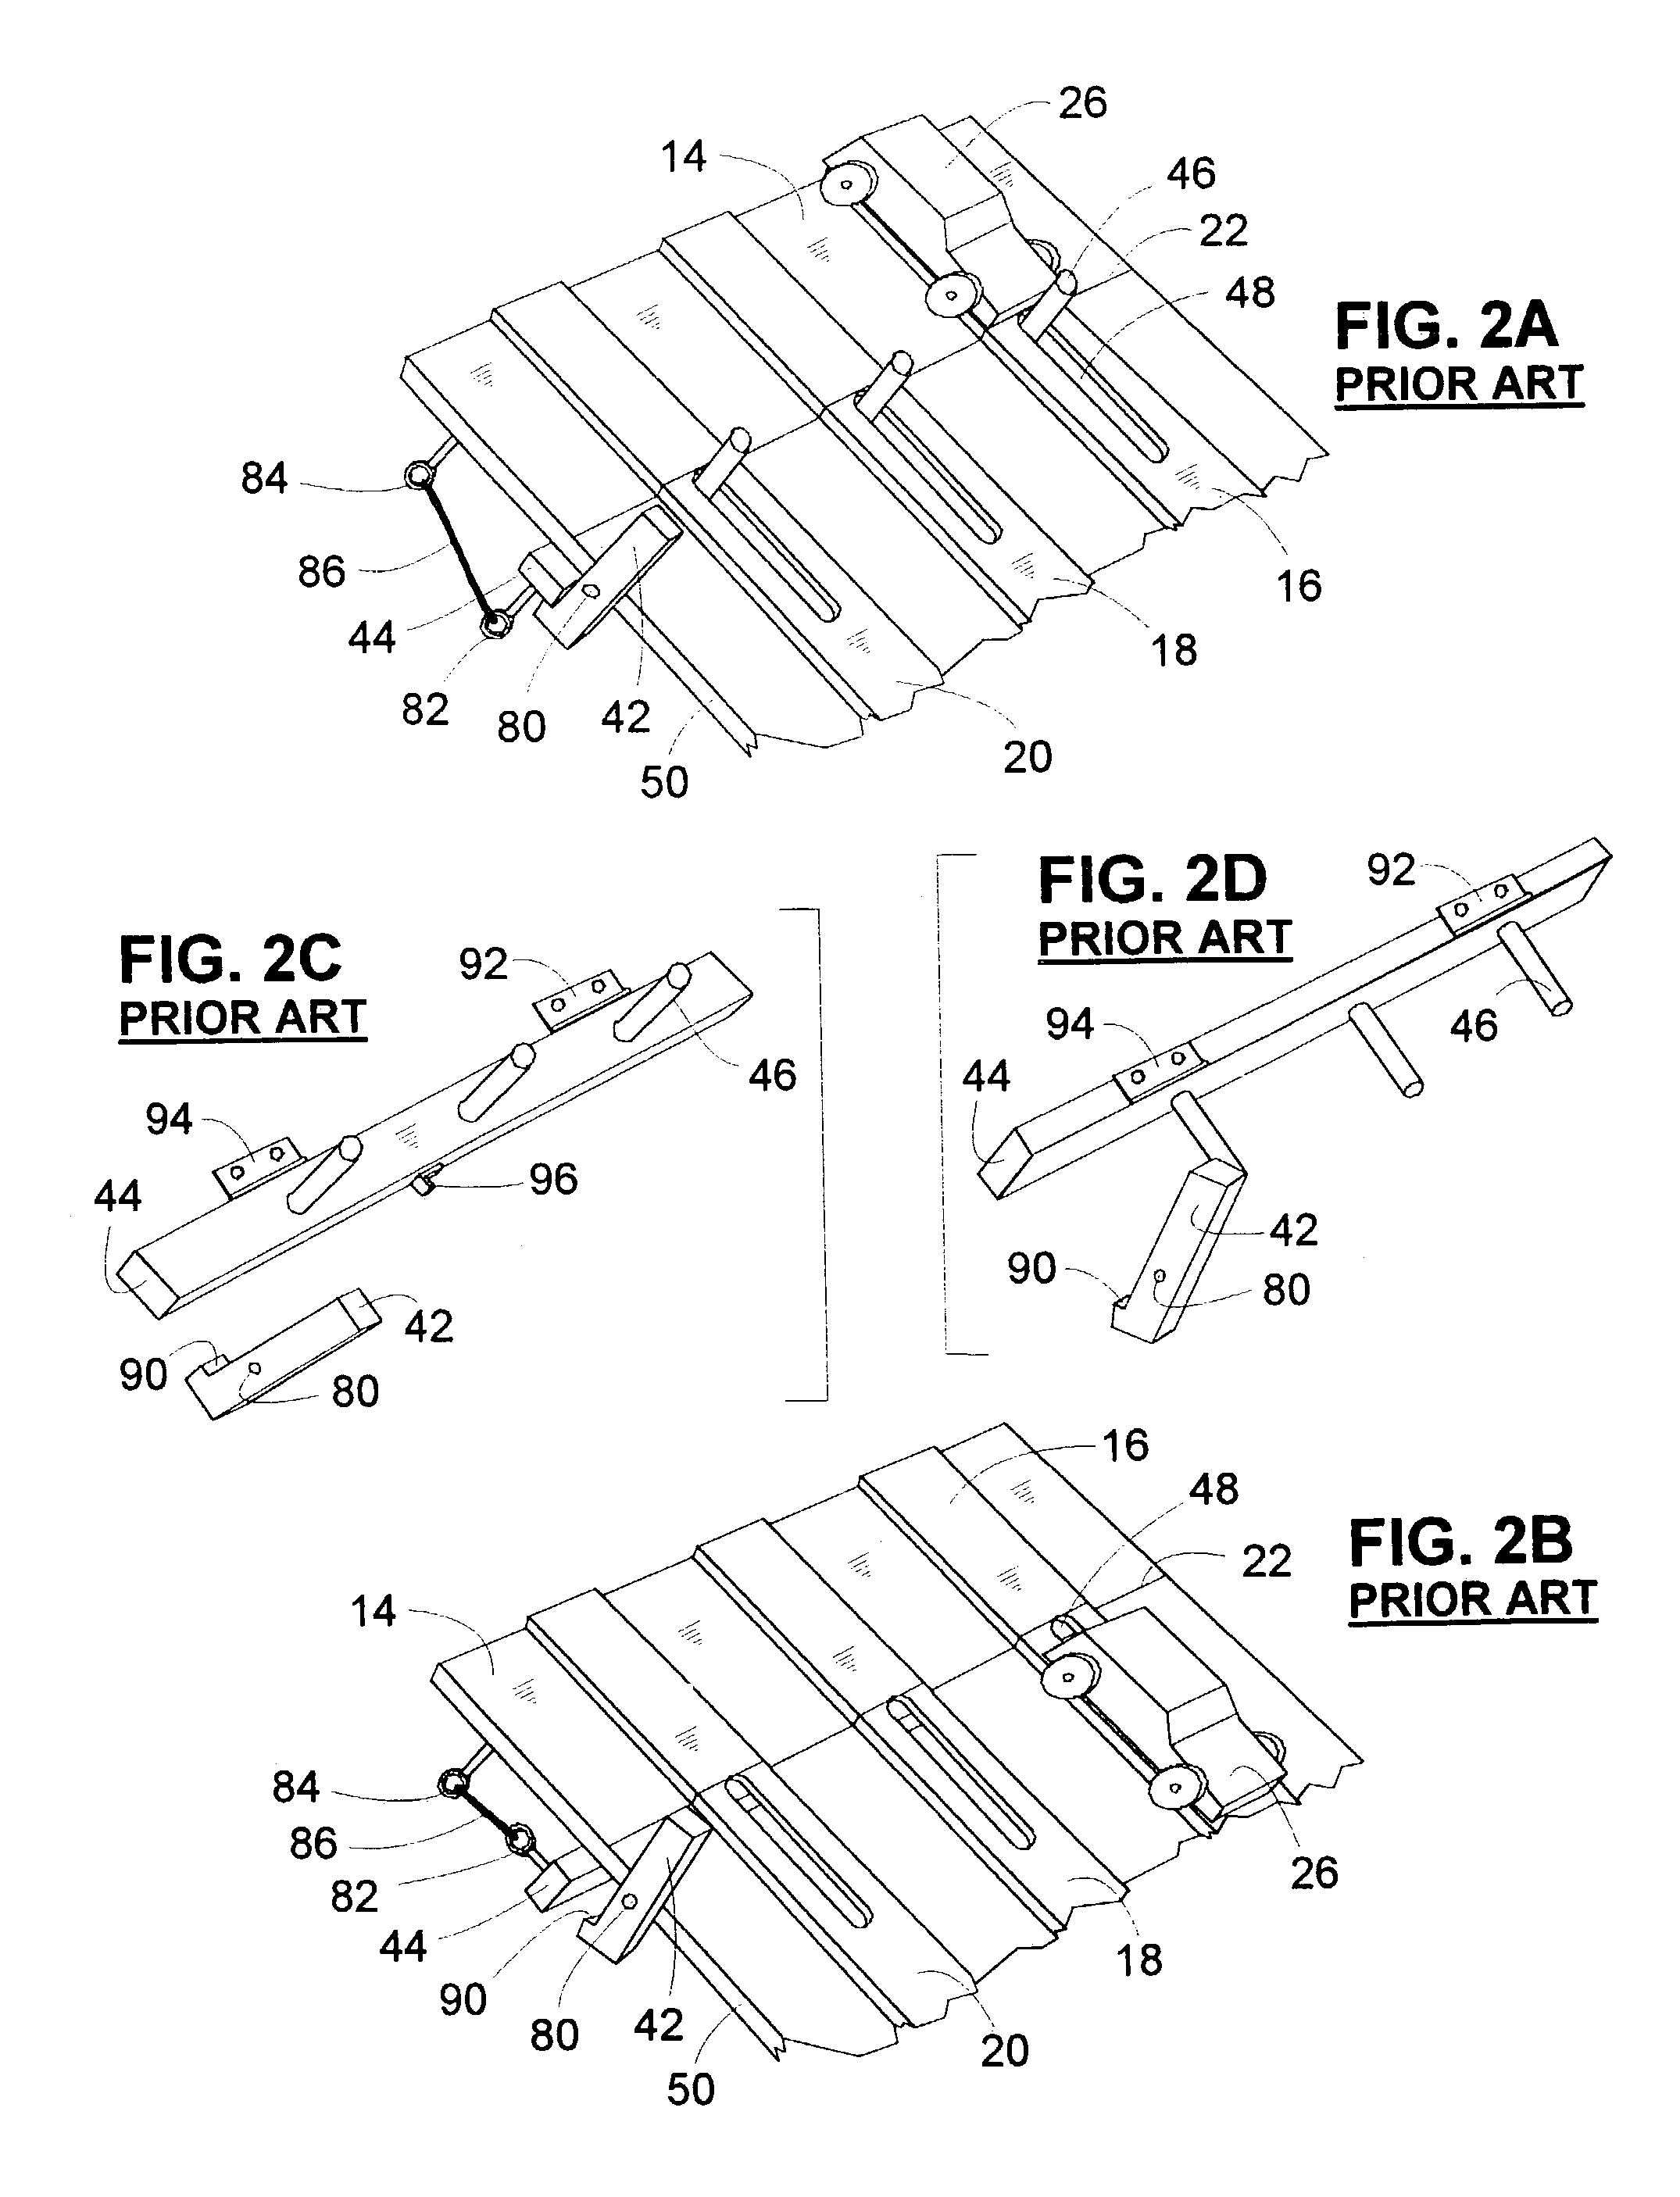 Collision obstacles and sensors for determining the outcome of a race